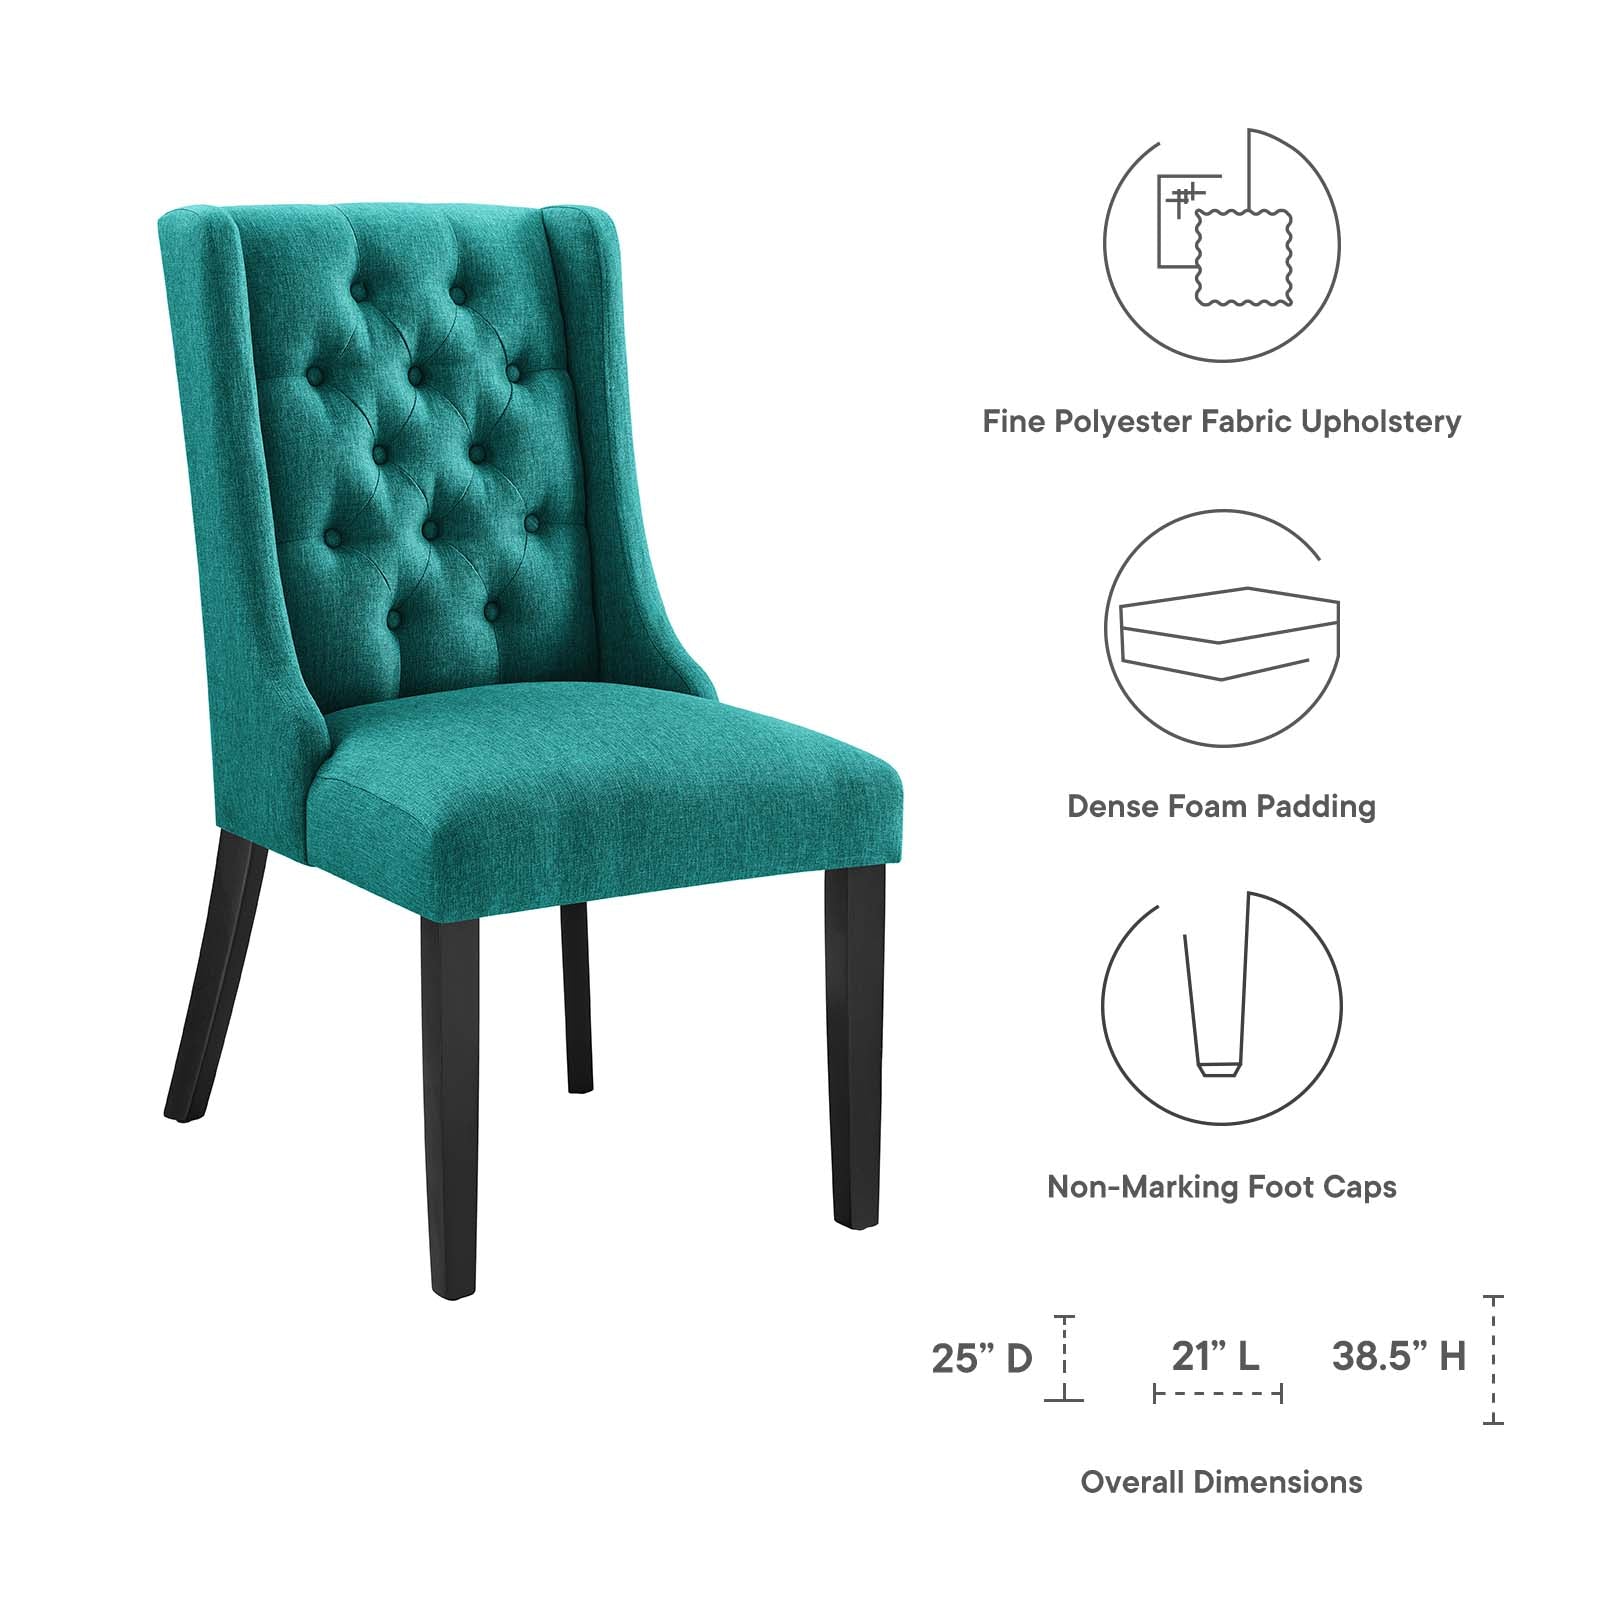 Modway Dining Chairs - Baronet Button Tufted Fabric Dining Chair Teal